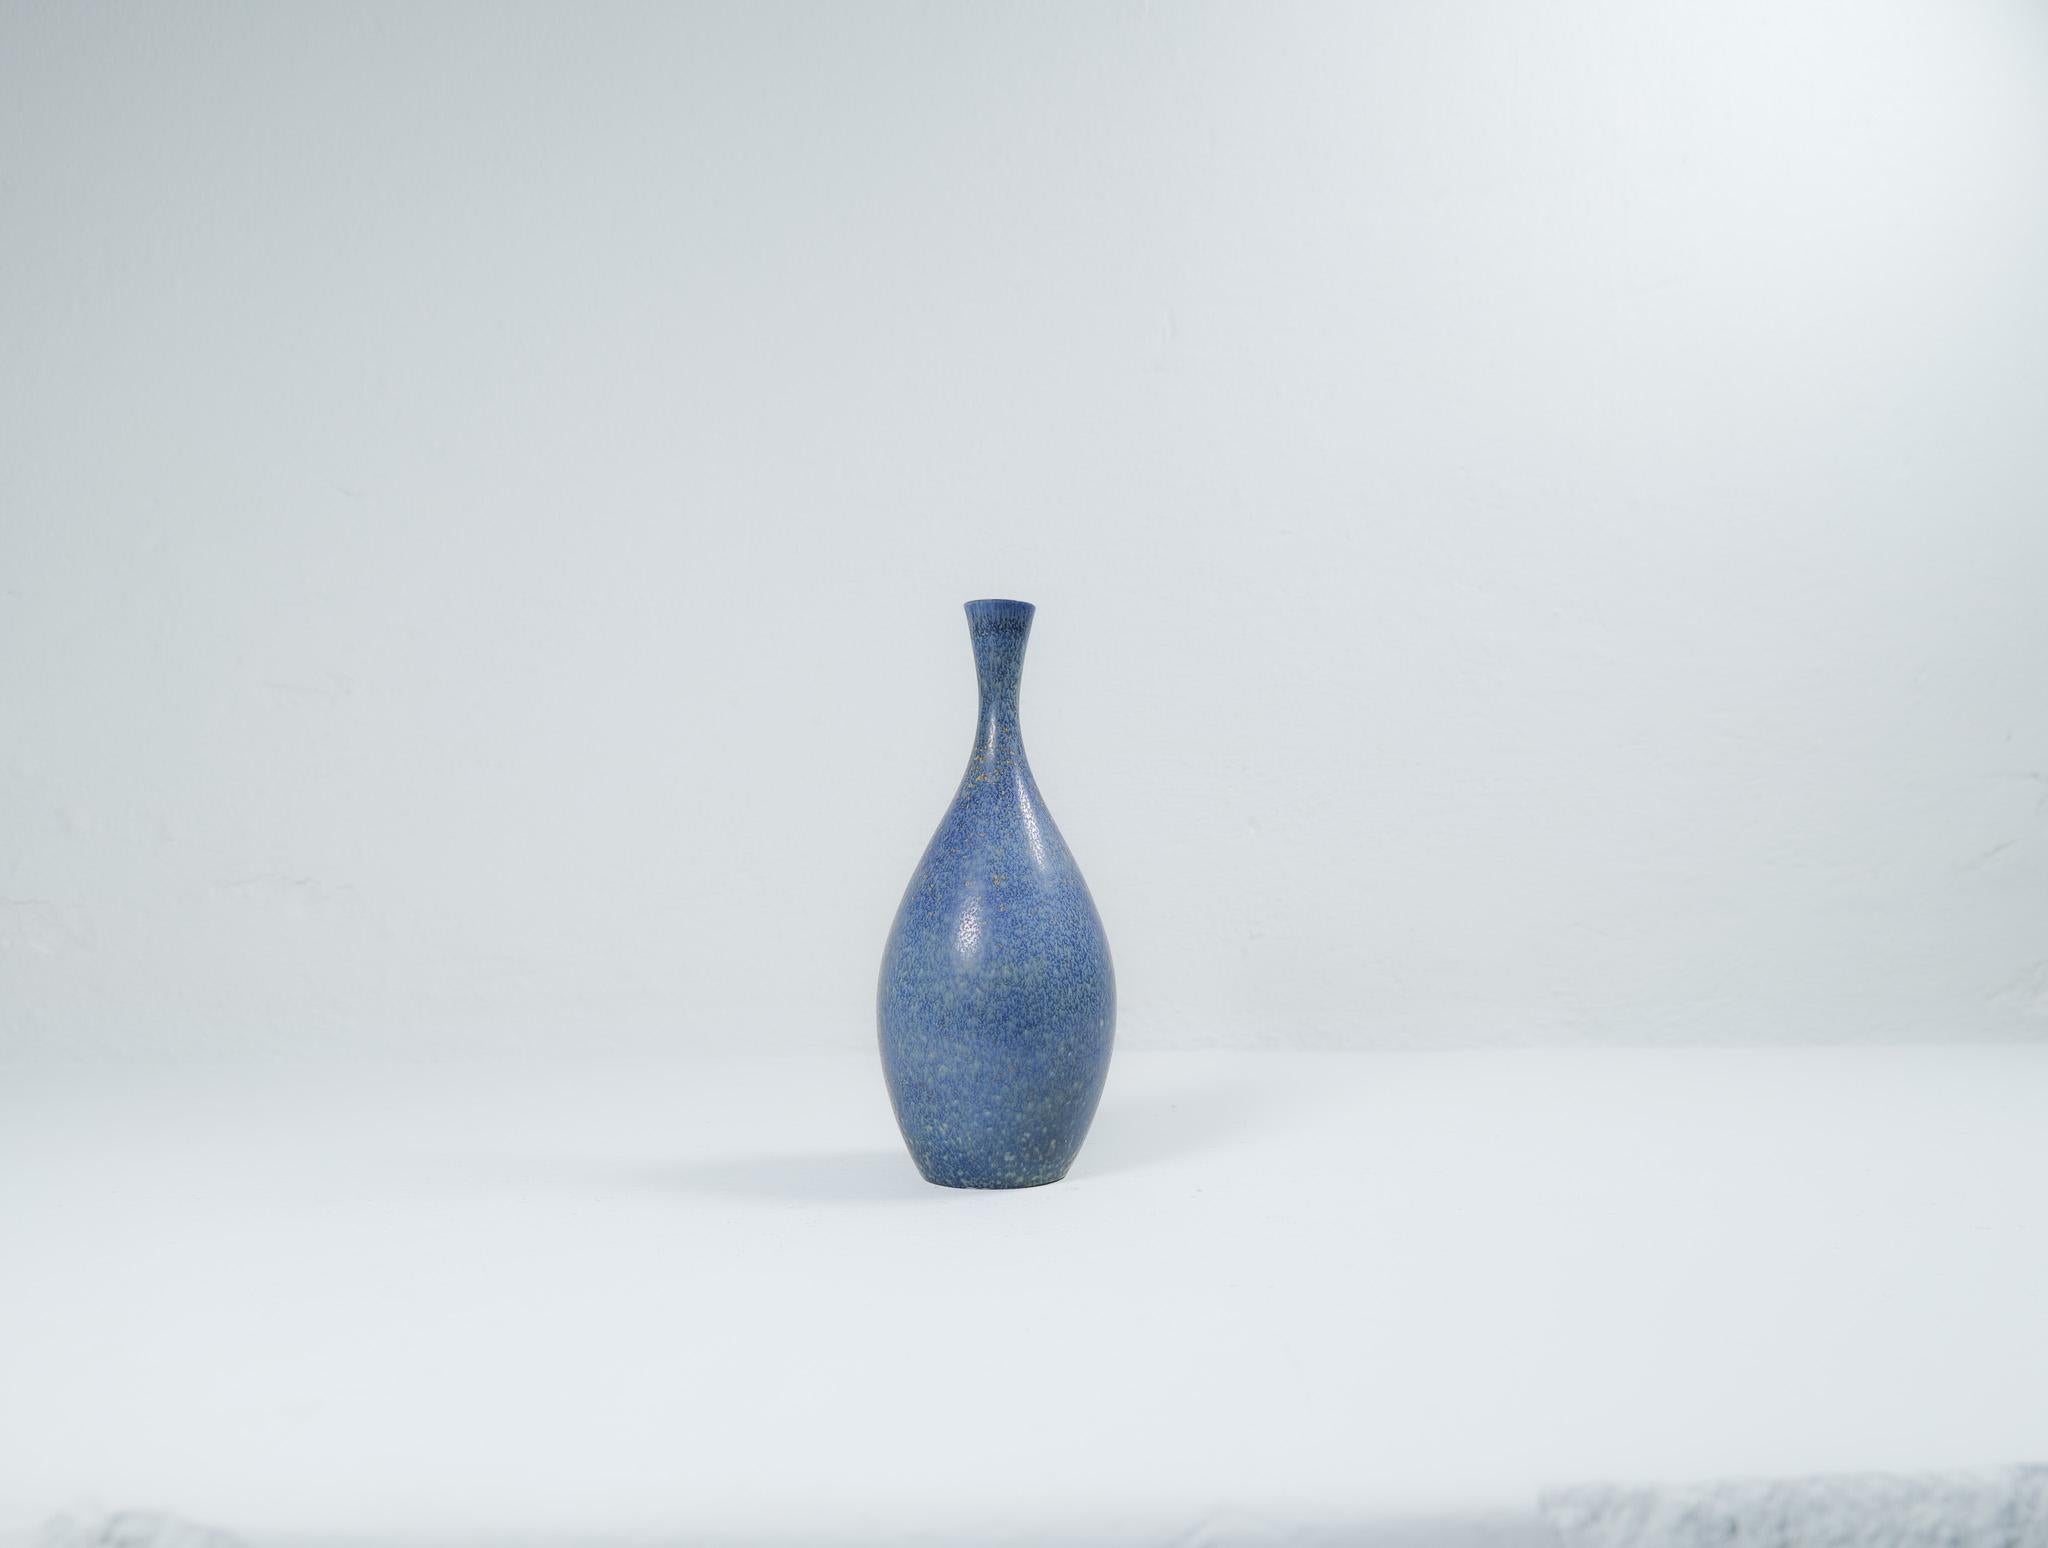 This stunning and not so usual piece of ceramic was produced at Rörstrand and maker/designer Carl Harry Stålhane. Made in Sweden in the 1950s. Exceptional beautiful blue glazed vases with nice lines. Its rounded bottom with blue glaze and